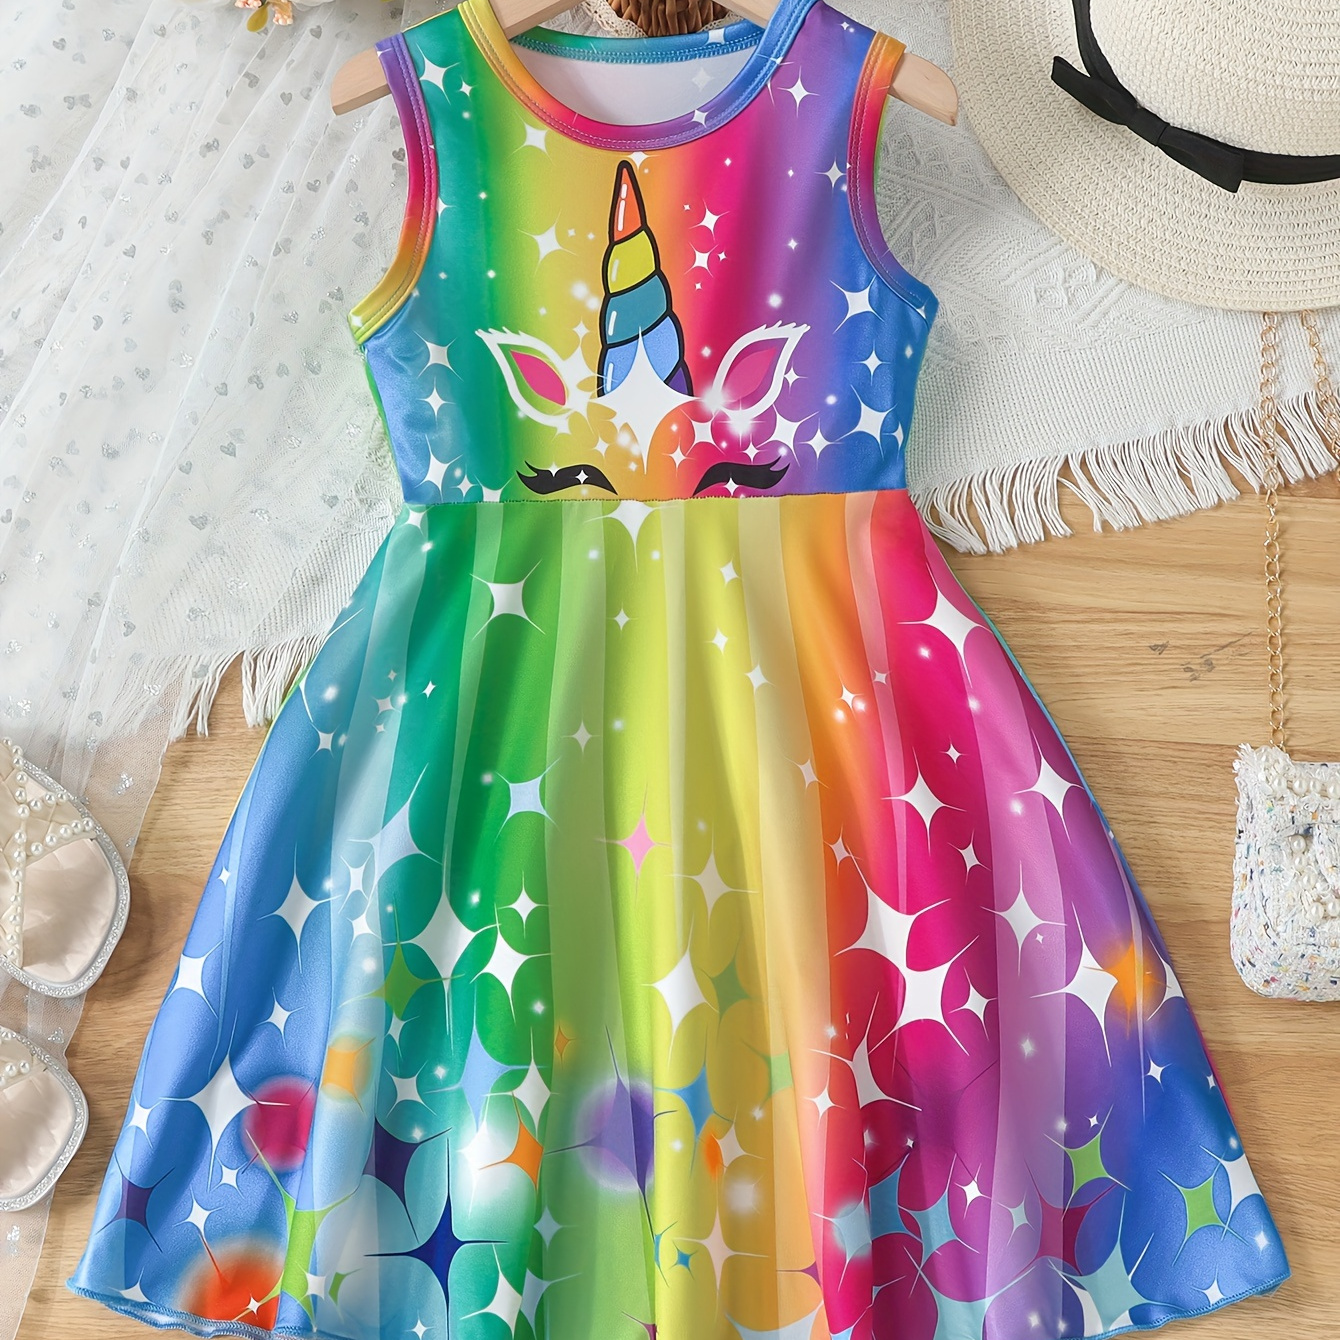 

Colorful Unicorn Print Sundress For Girls, Stretch Sleeveless Dress For Party Going Out